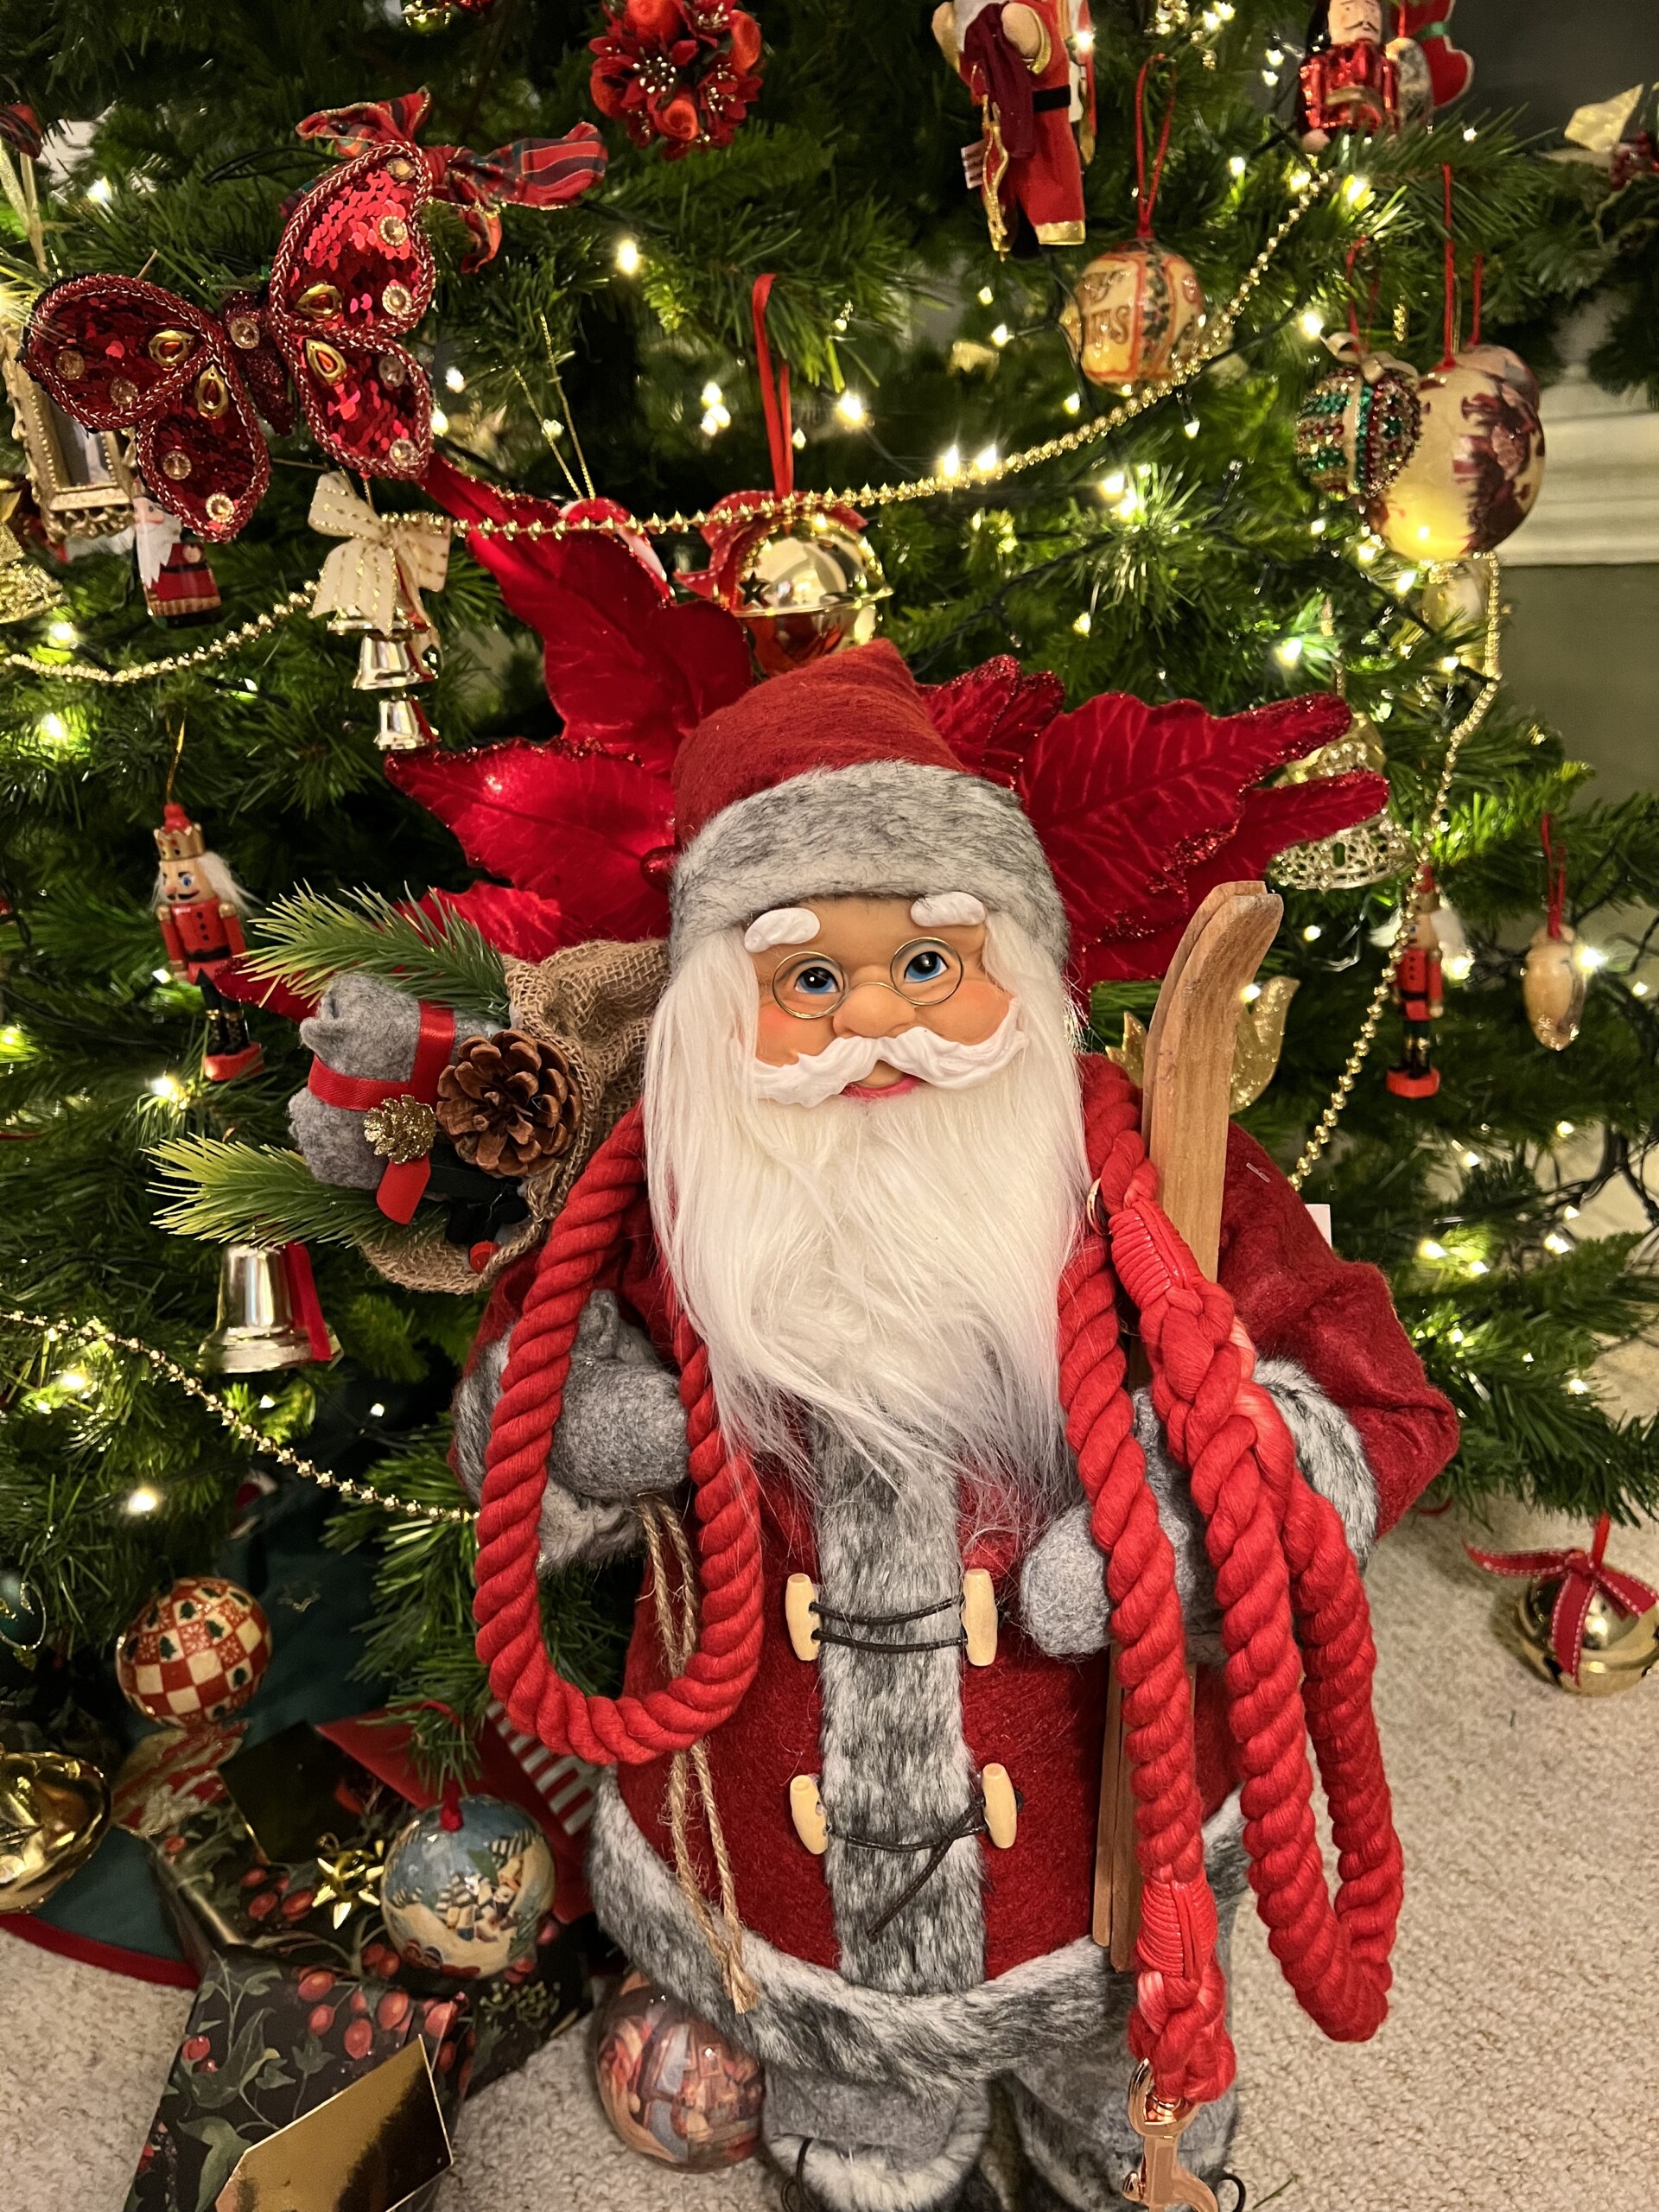 A toy santa statue holds a christmas red rainbow rope lead for dogs. he is standing in front of a decorated christmas tree.